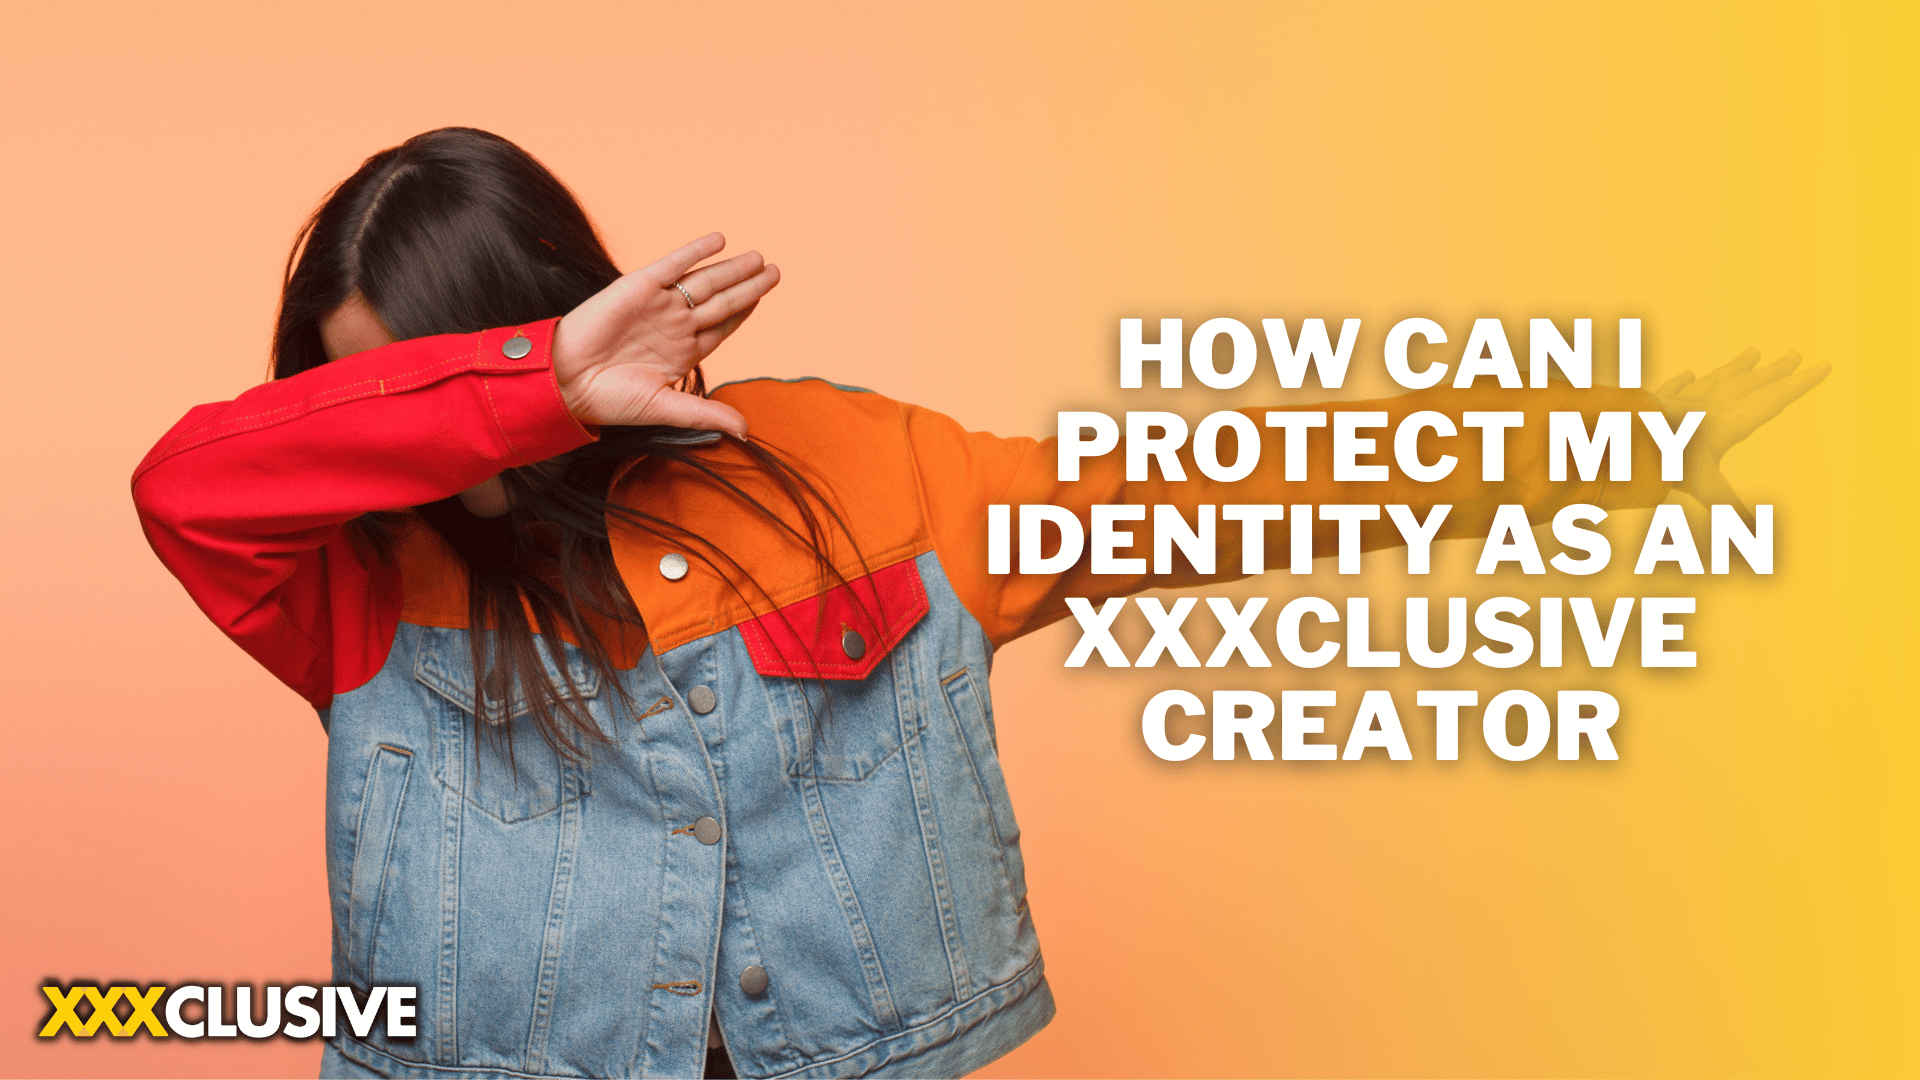 How Can I Protect My Identity As An XXXCLUSIVE Creator